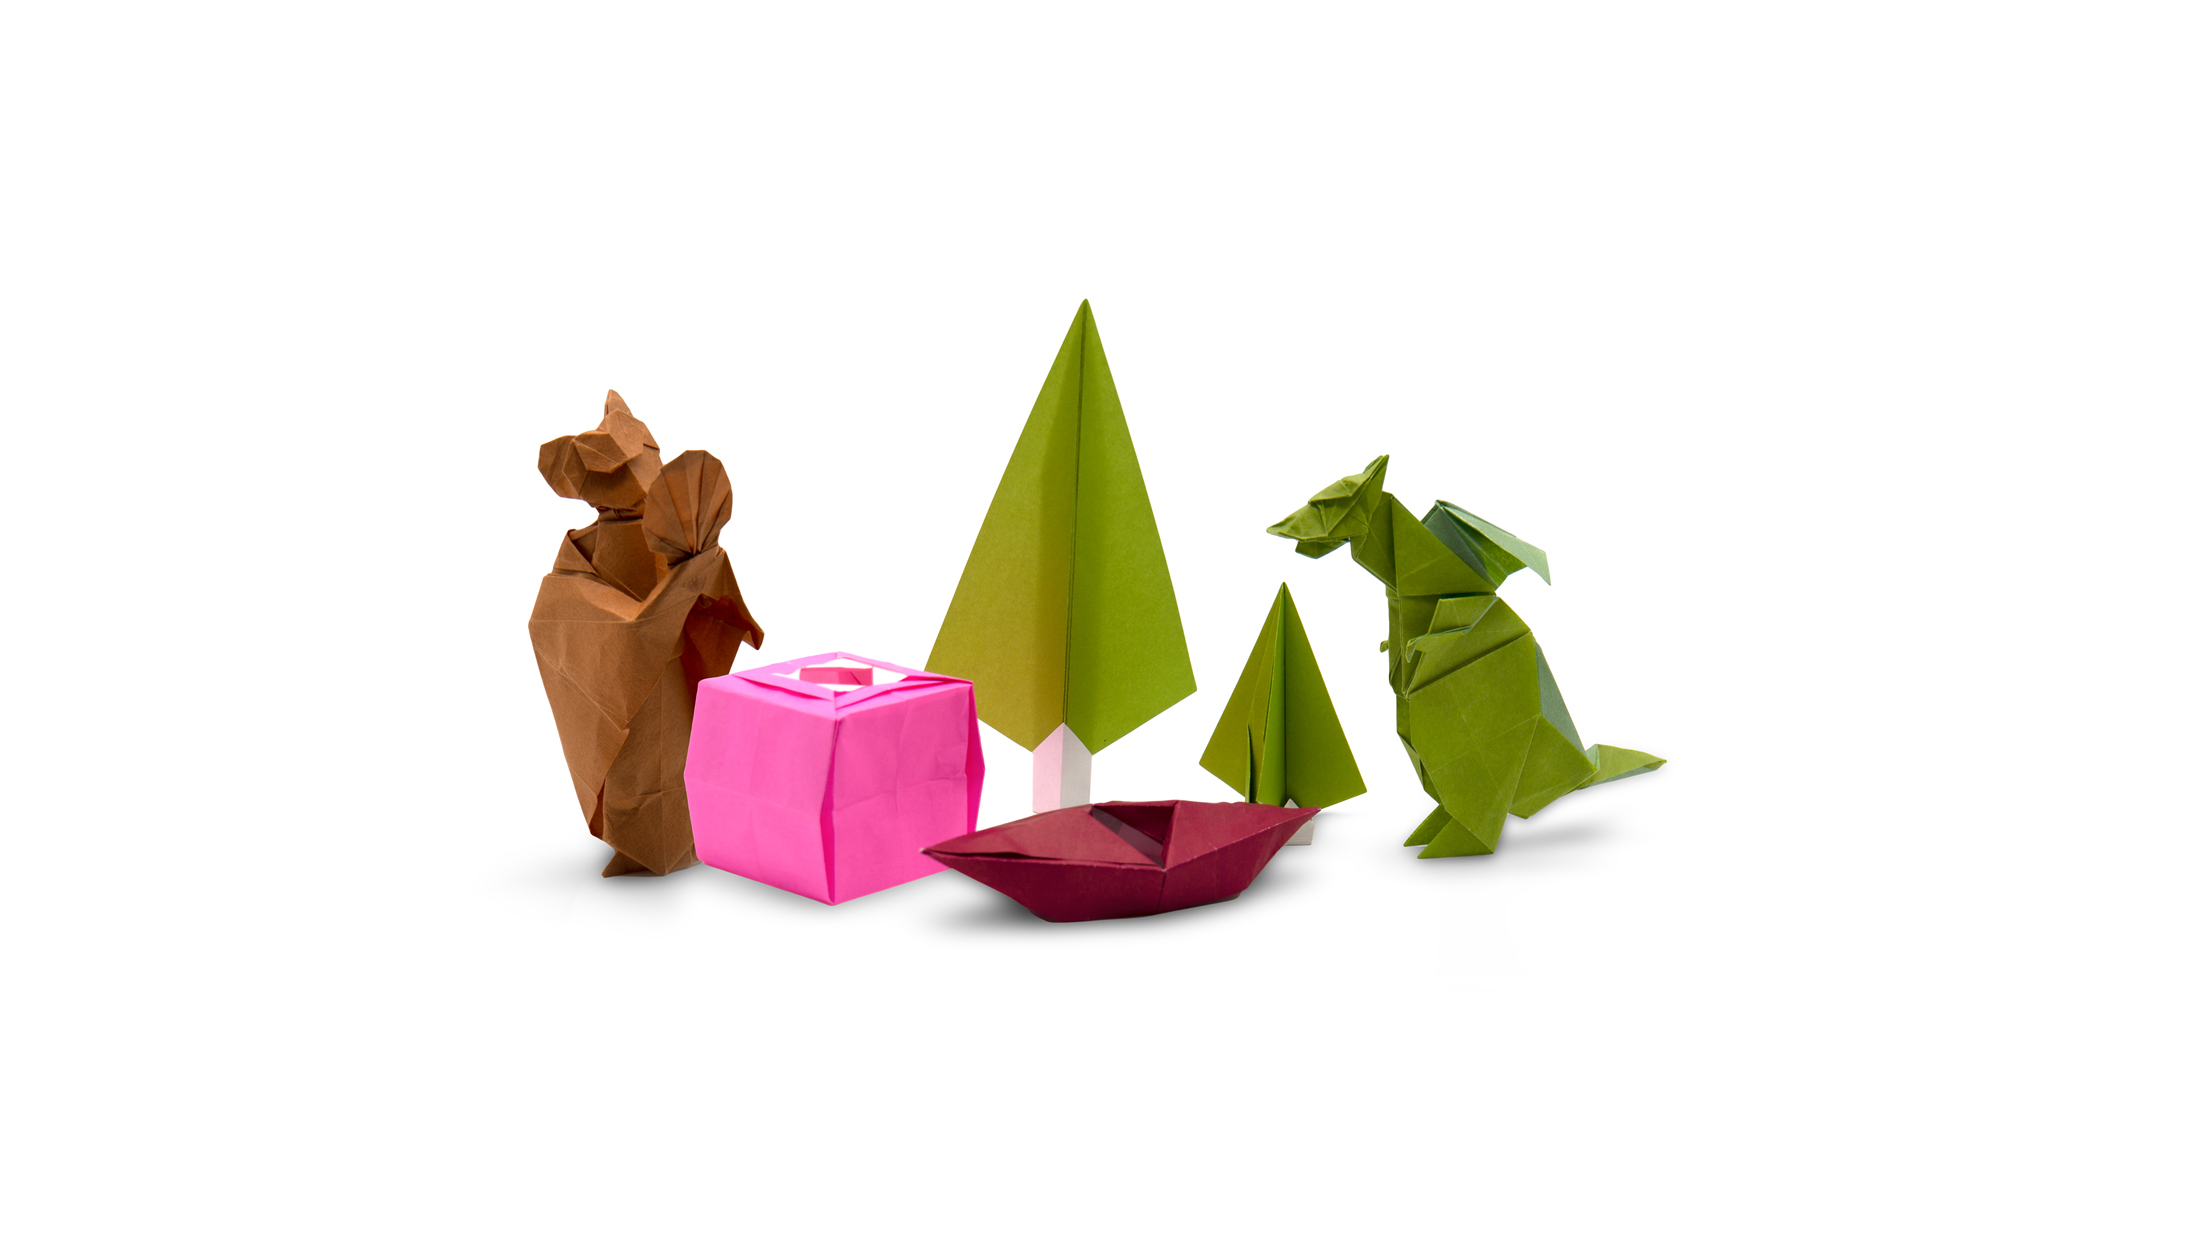 some of the origami models taught at Foldfest 2021 by OrigamiUSA